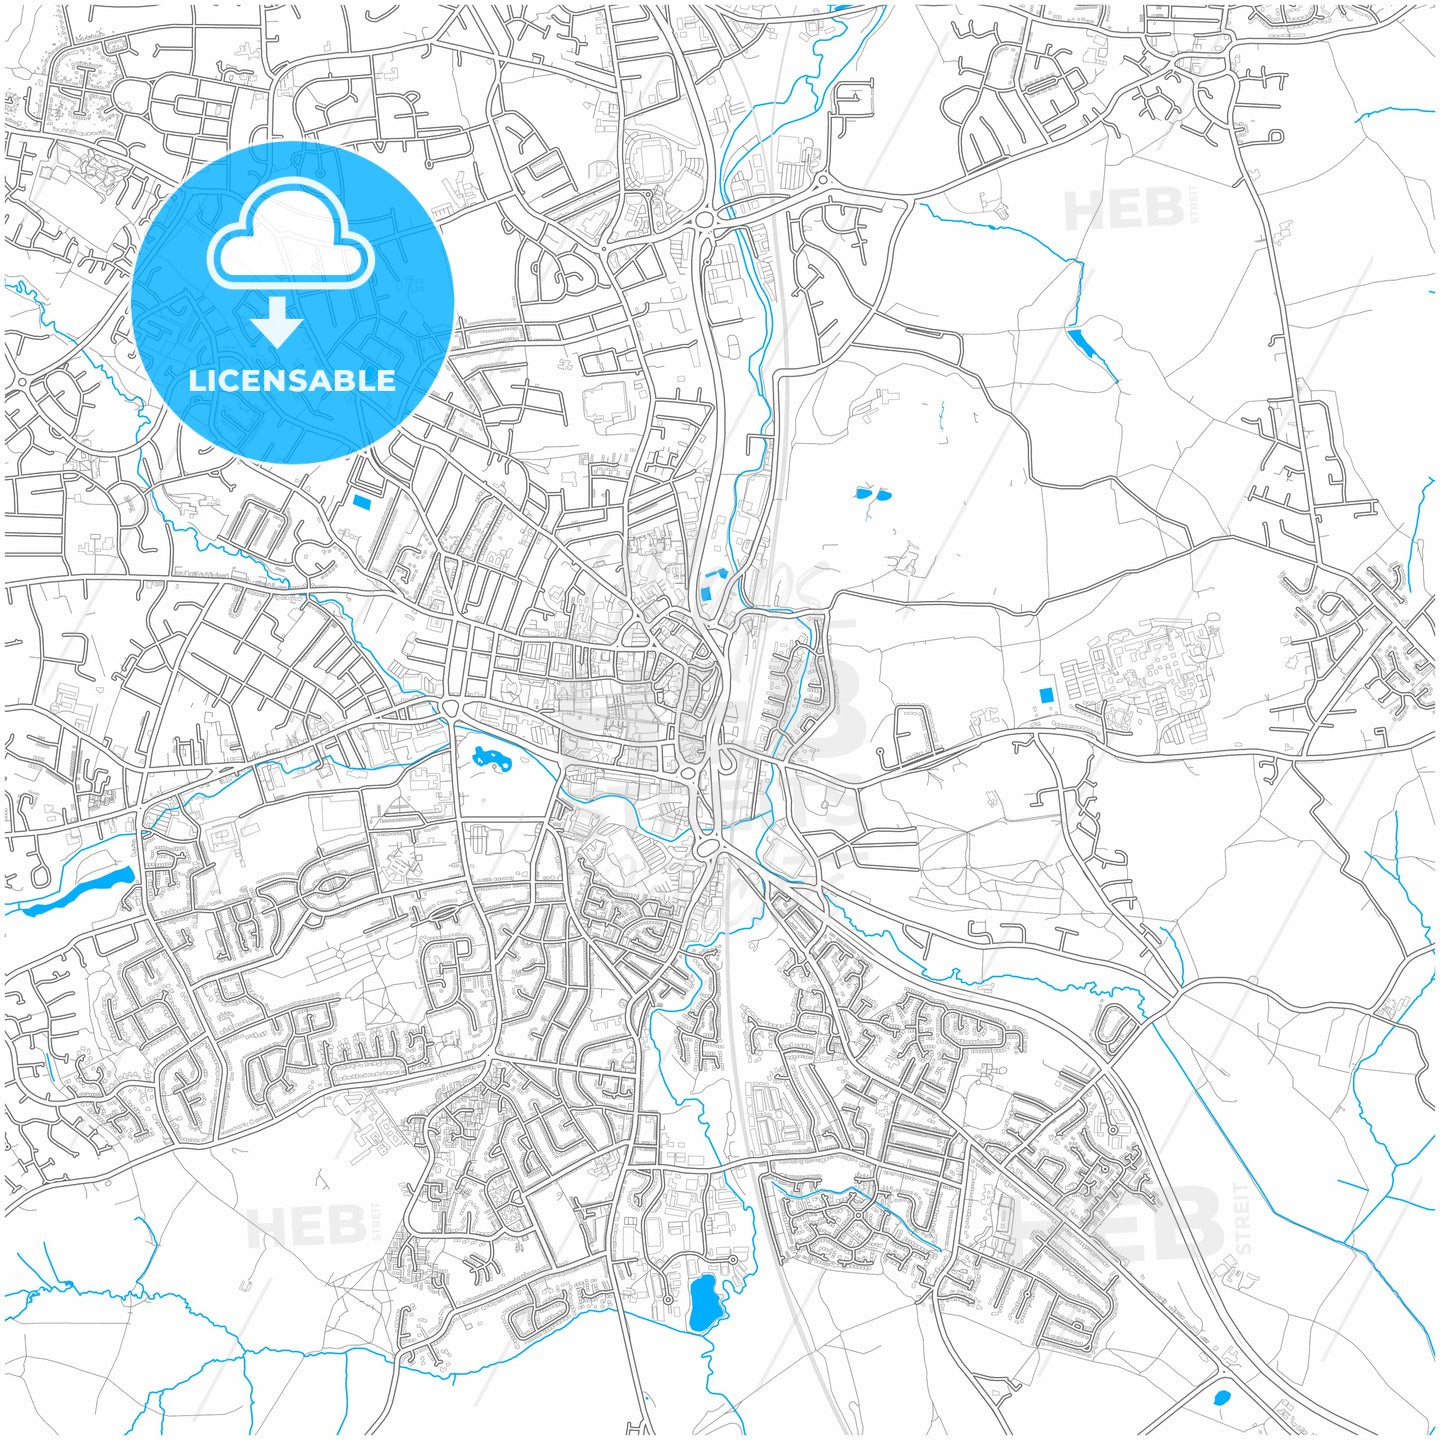 Chesterfield, East Midlands, England, city map with high quality roads.